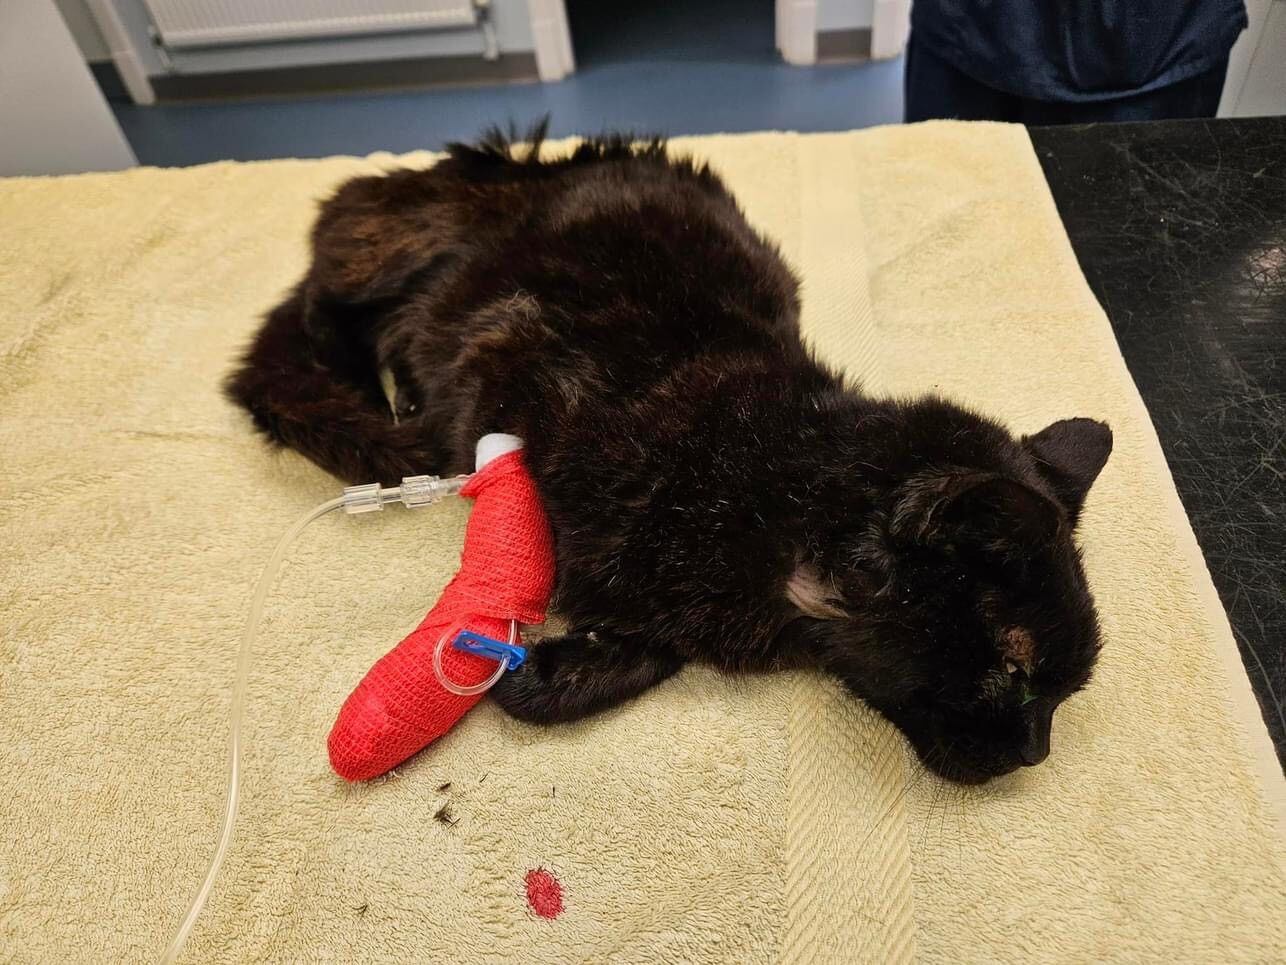 Appeal launched after extremely unwell cat found abandoned by rubbish bins in Kidderminster